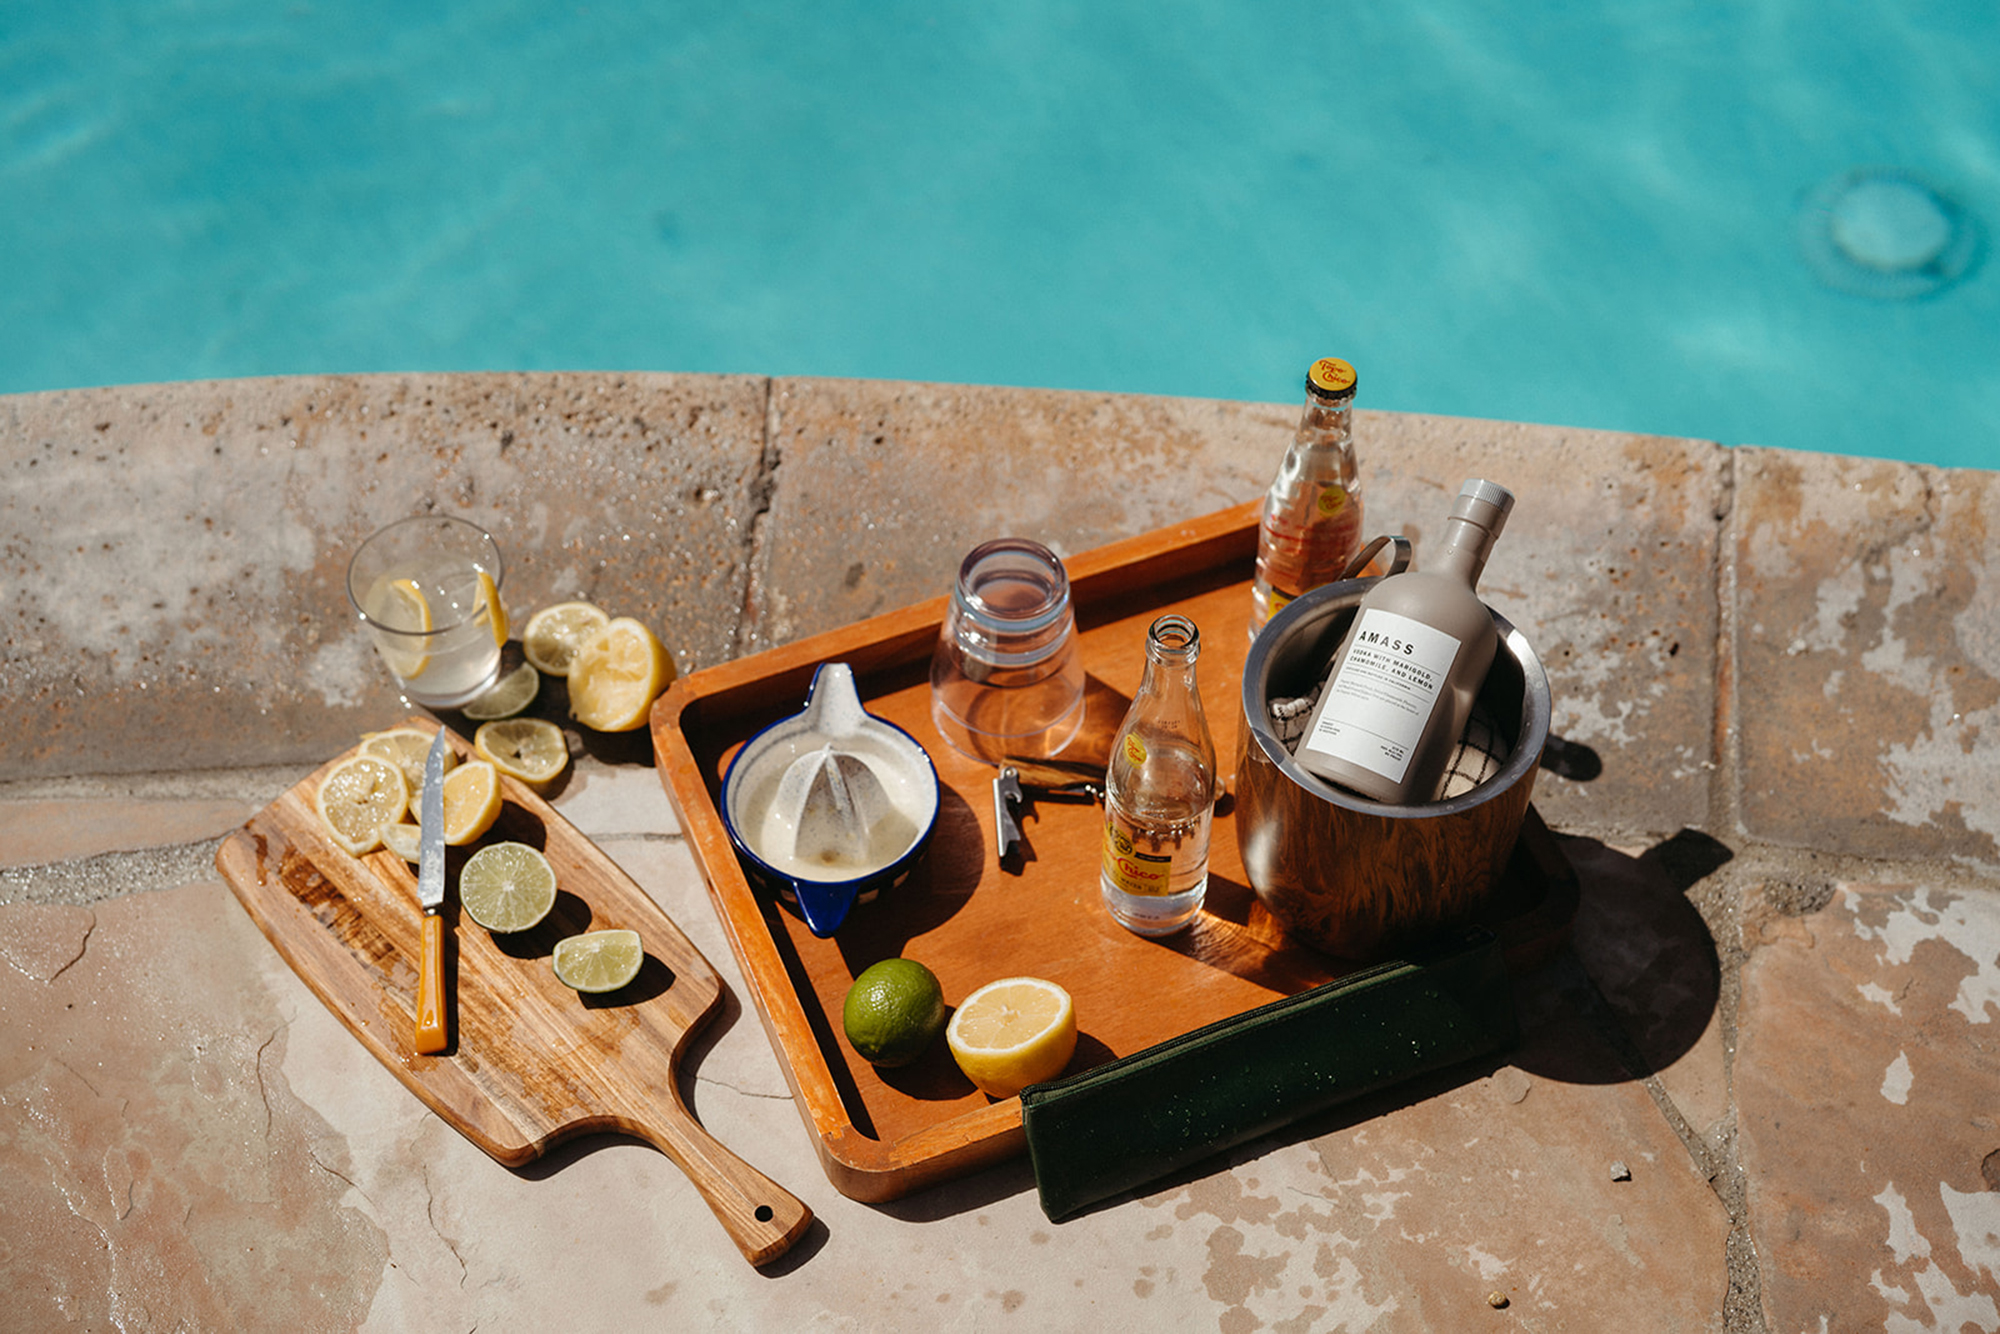 Cocktail Kit with AMASS, Topo Chico, and fresh citrus on a wooden serving tray and cutting board poolside at Casa Cody, Palm Springs.